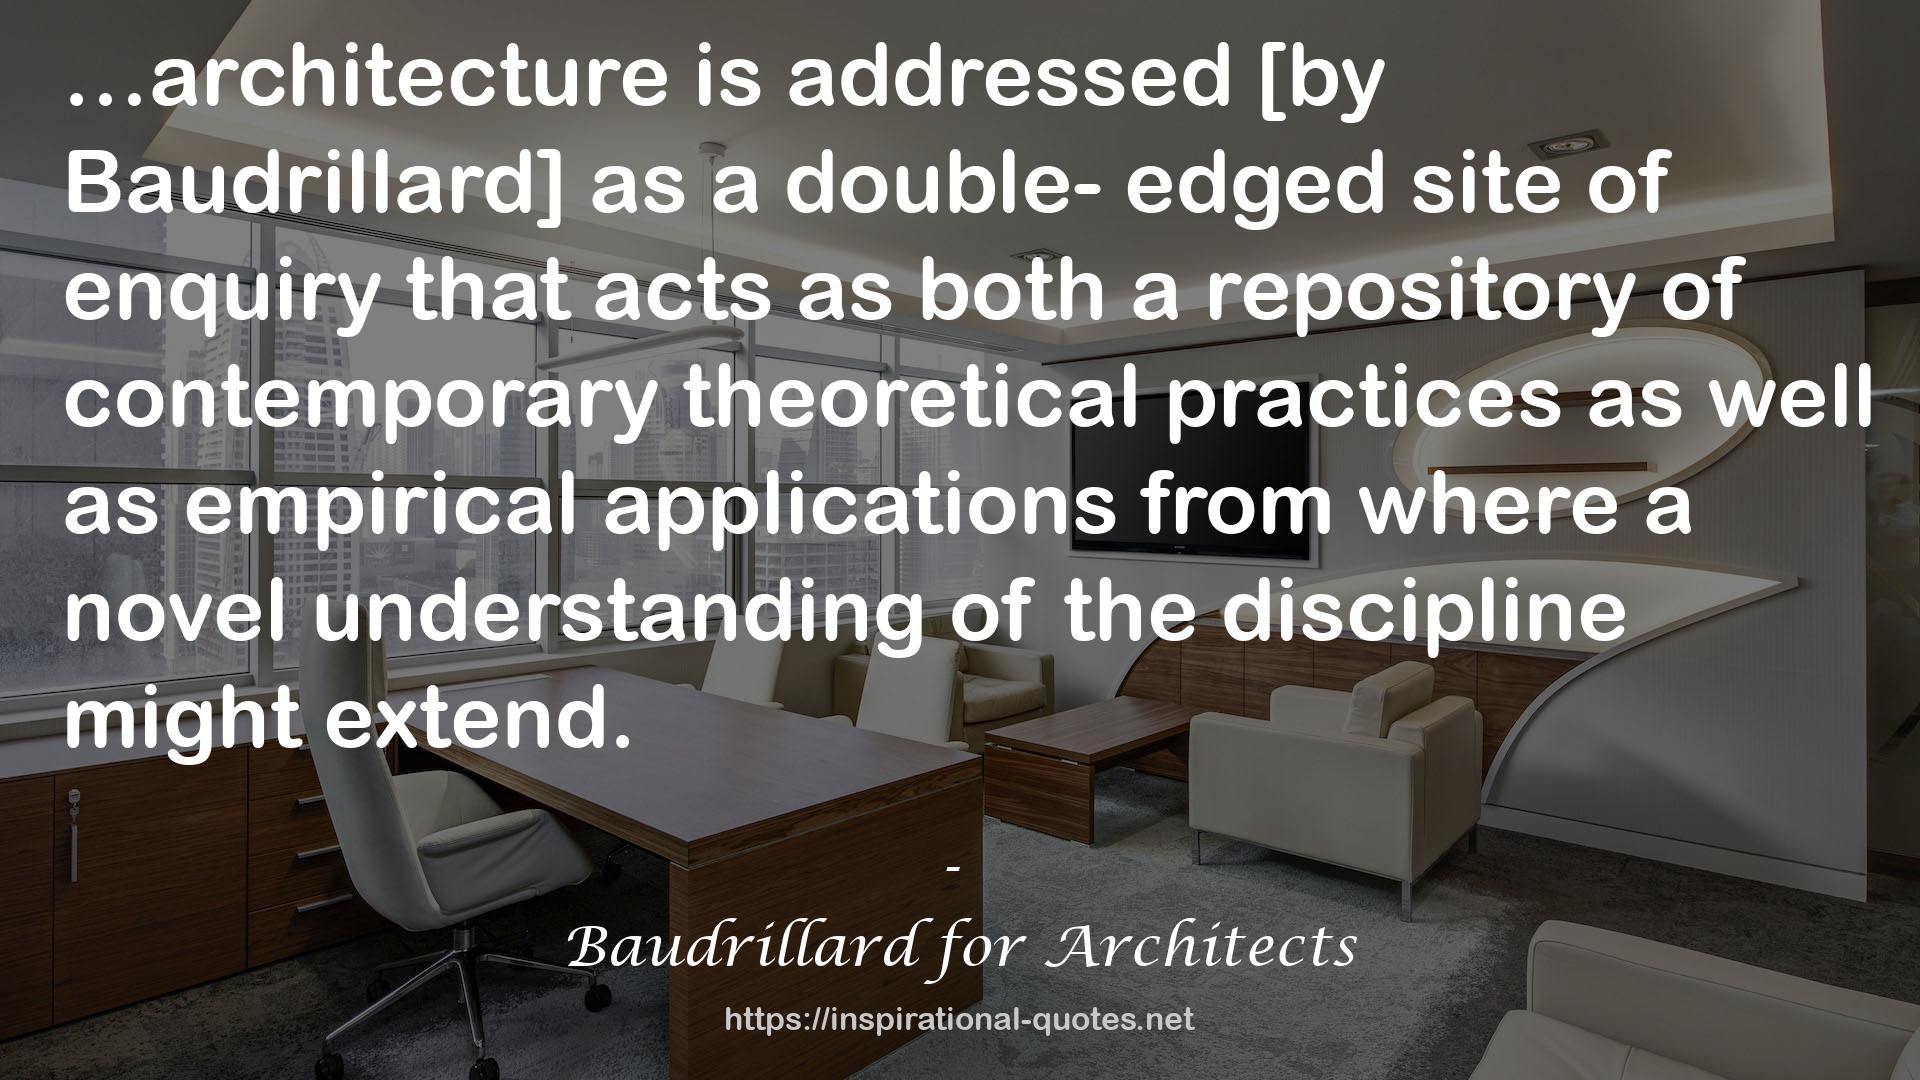 Baudrillard for Architects QUOTES